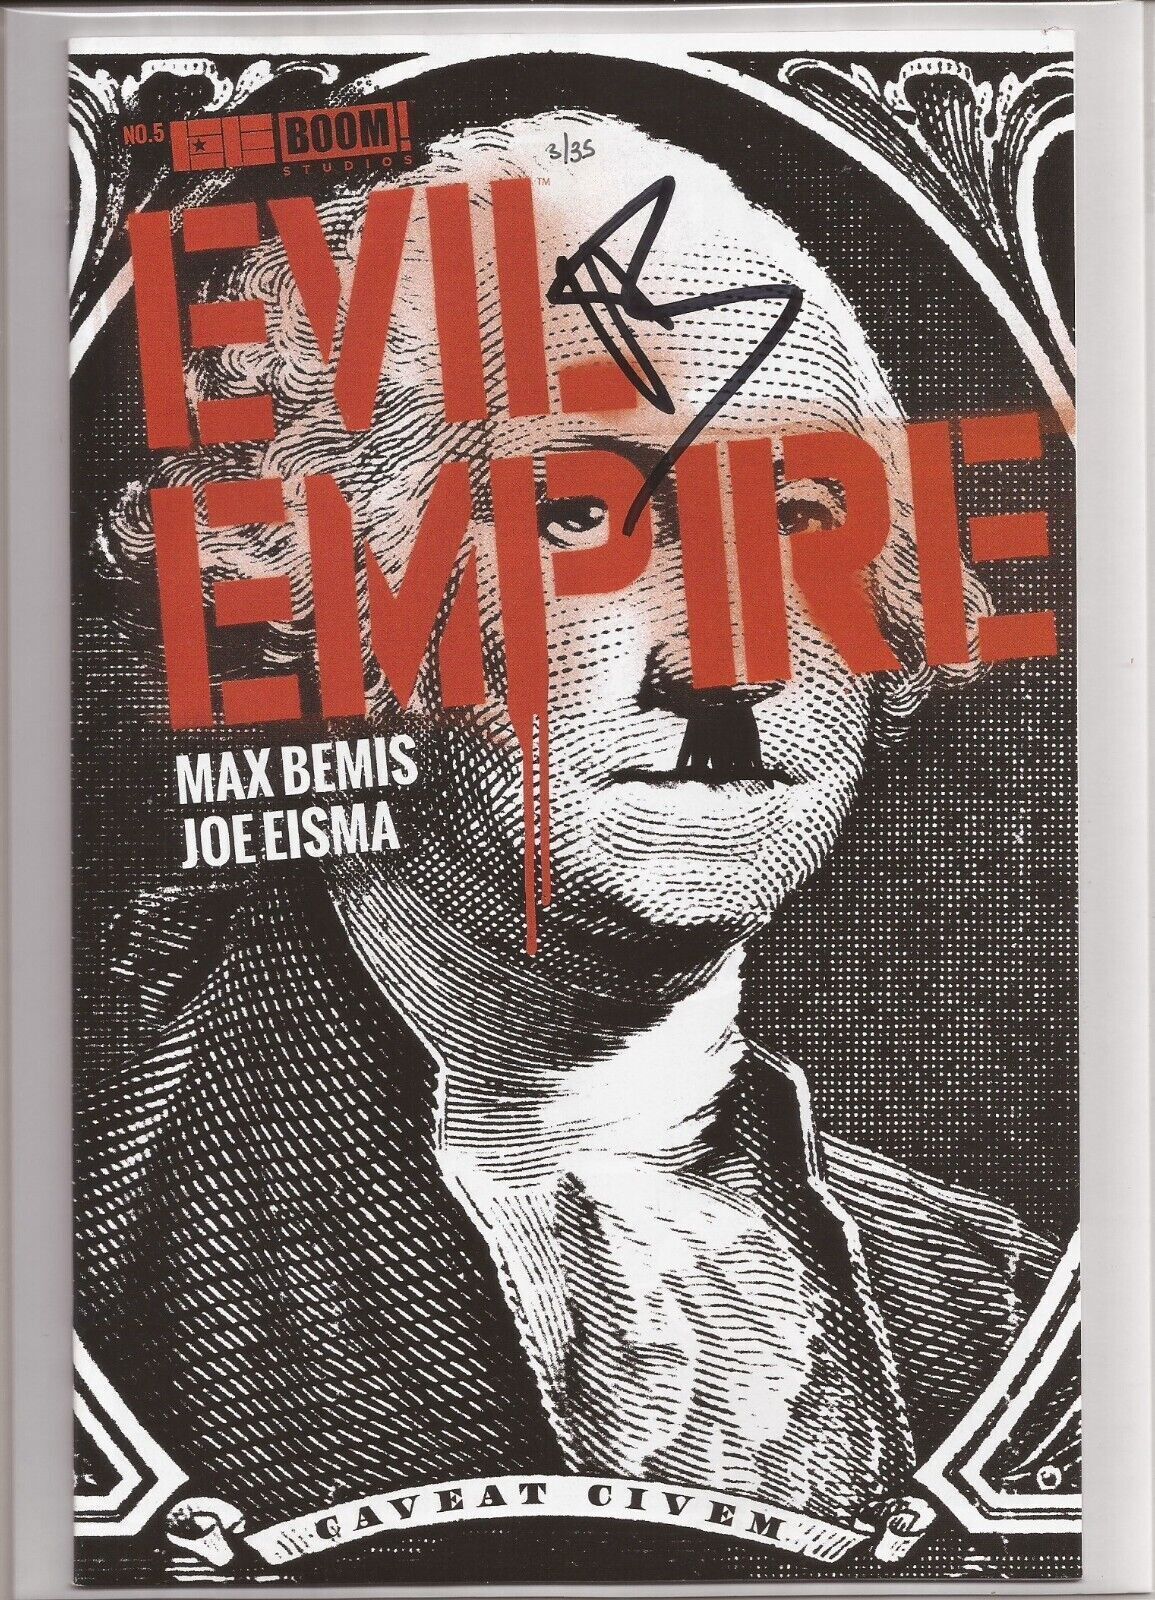 EVIL EMPIRE #5 - SIGNED BY MAX BEMIS - LIMITED TO ONLY 35 COPIES W/ DF COA #3/35